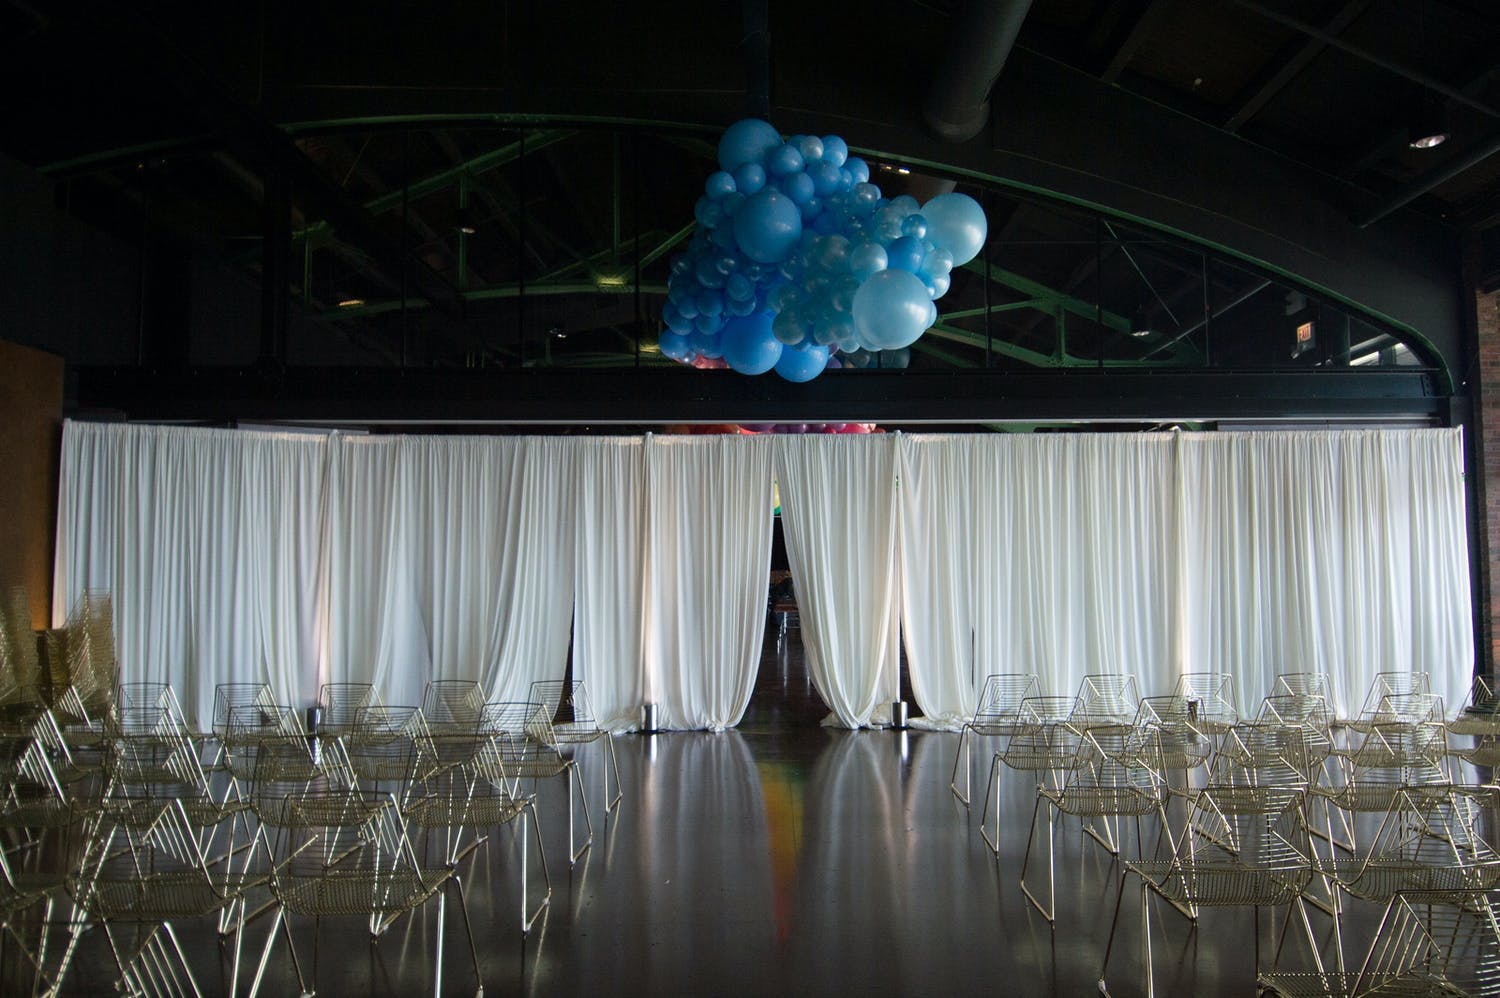 Minimalist Wedding Reception at Theater on the Lake With White Drapery Backdrop and Blue Balloon Ceiling Installation | PartySlate